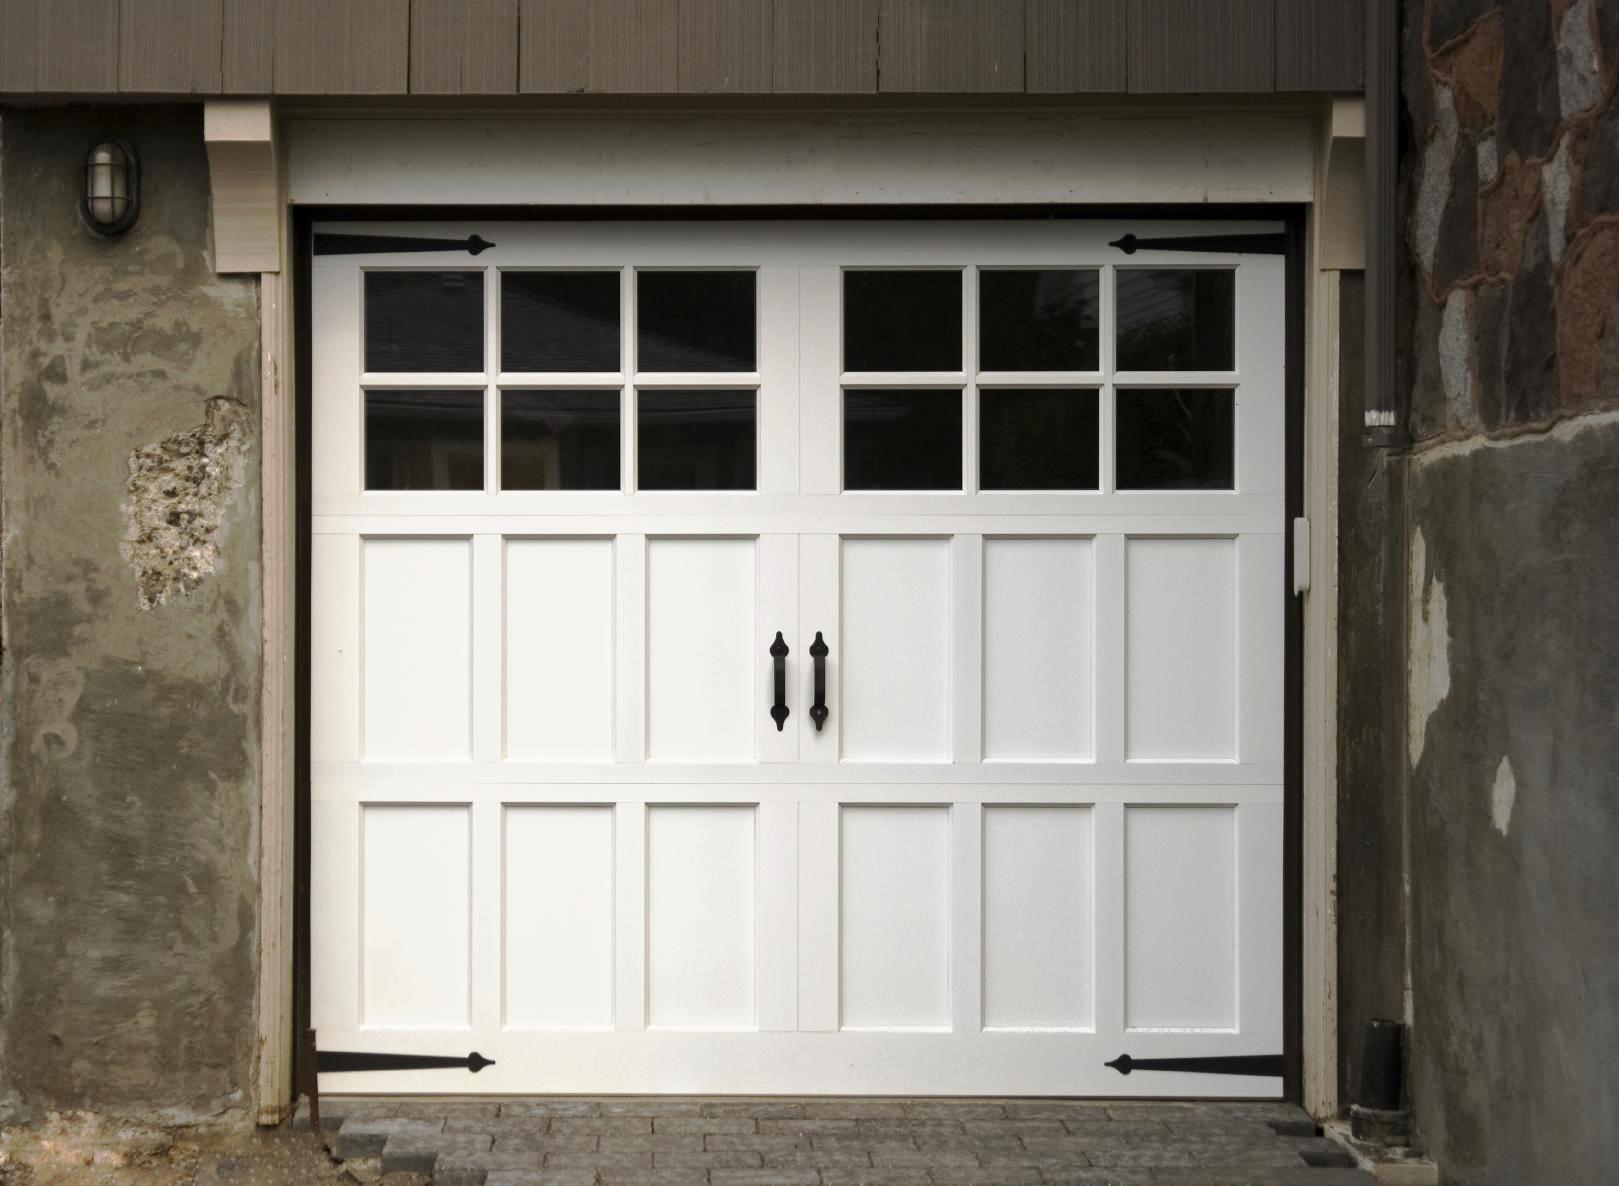 Garage Doors With Windows In The Middle